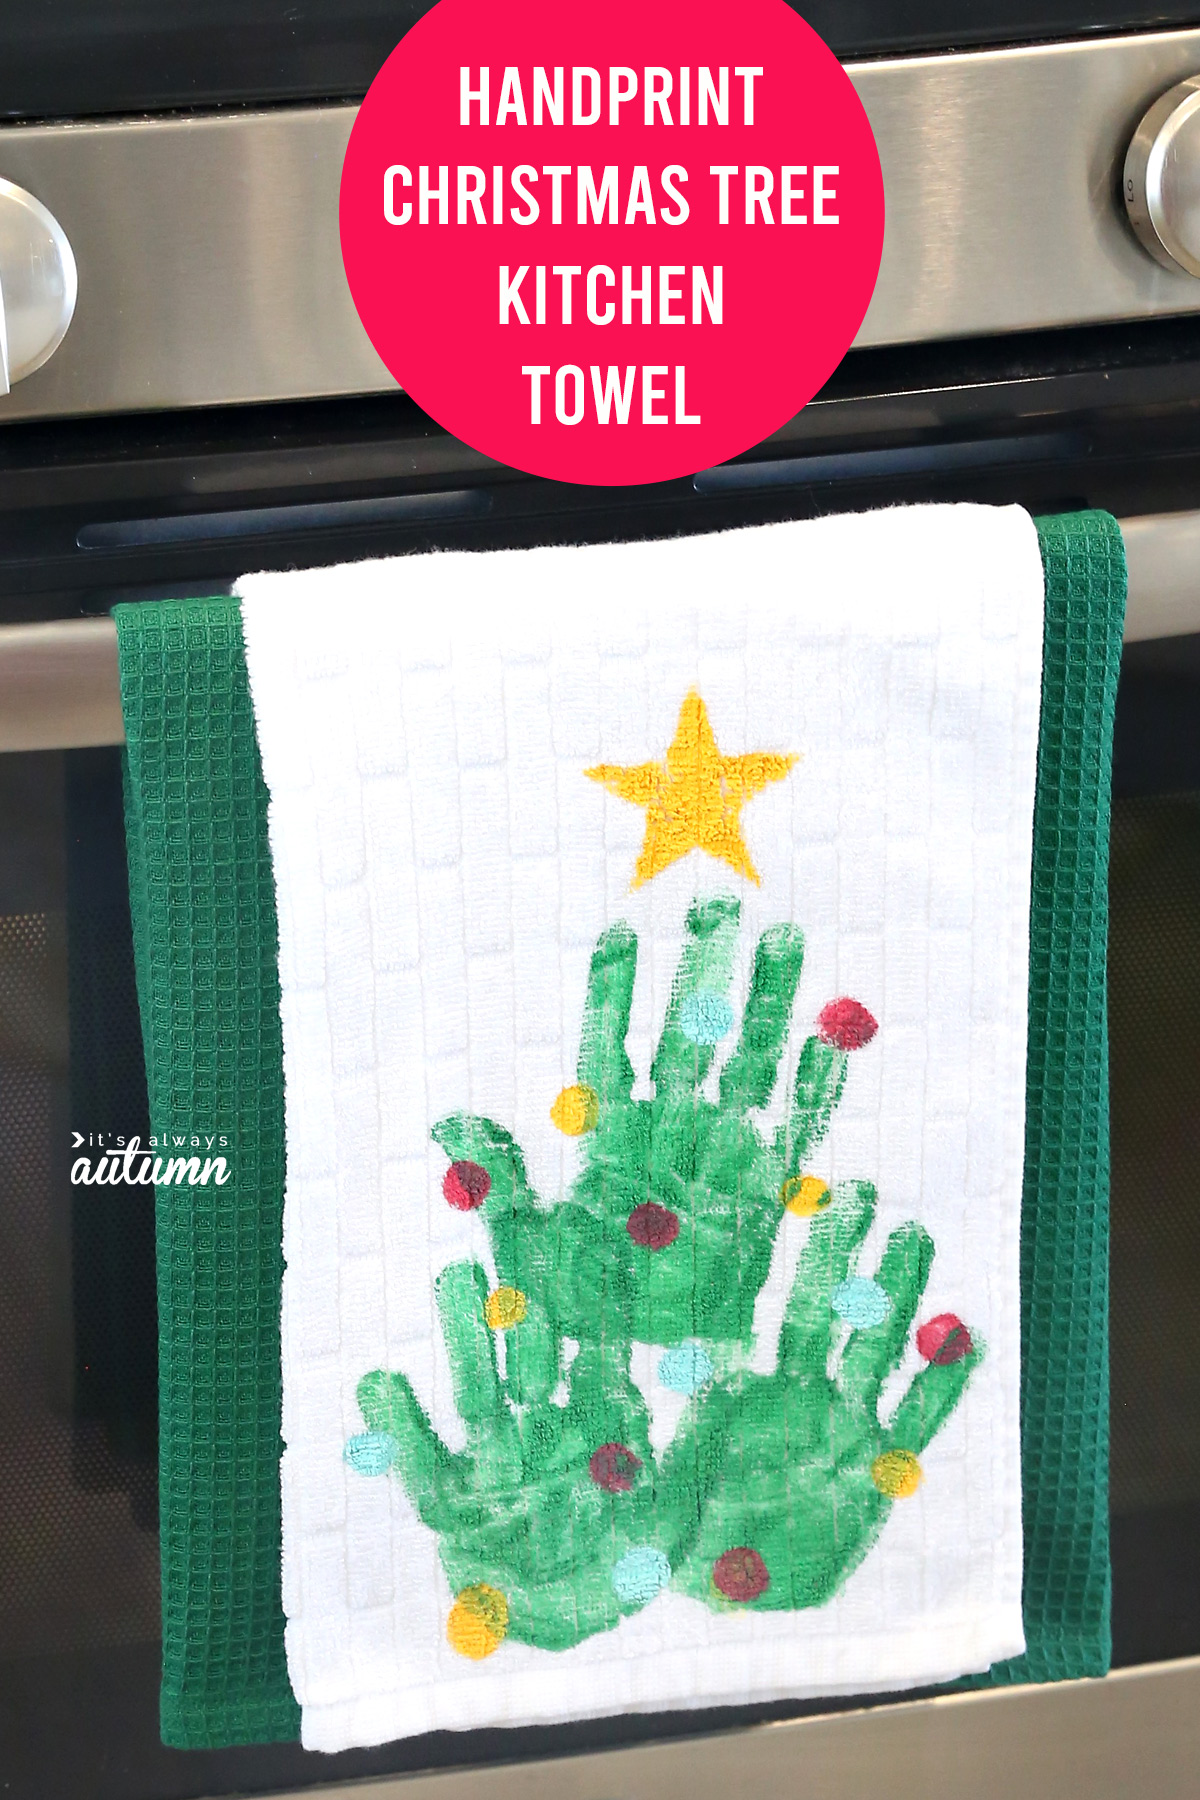 This adorable handprint Christmas tree kitchen towel makes a great gift for grandparents!